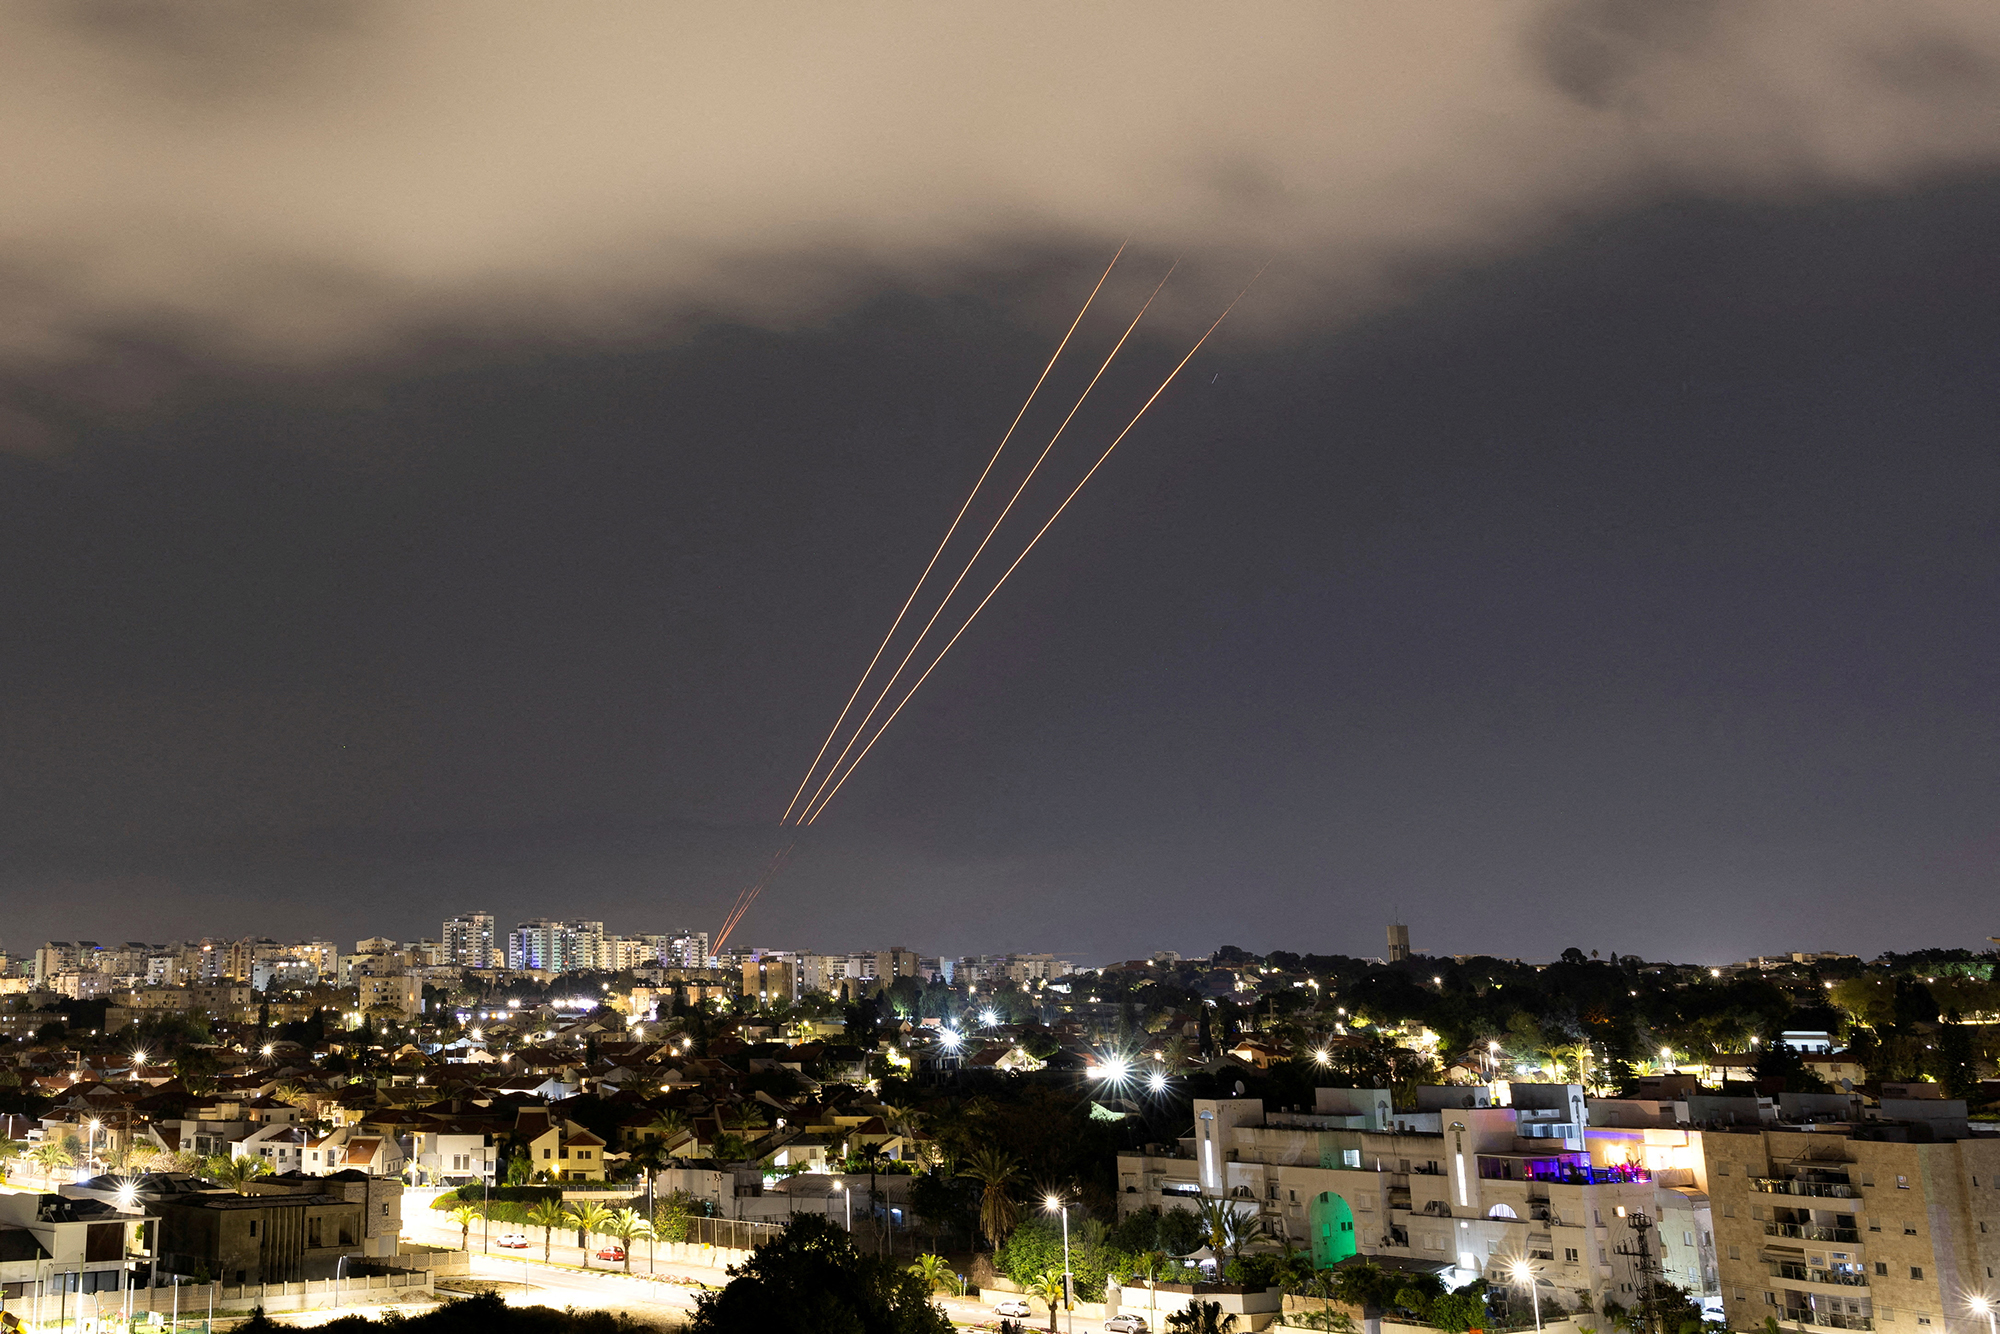 An anti-missile system operates after Iran launched drones and missiles towards Israel, as seen from Ashkelon, Israel, on April 14.